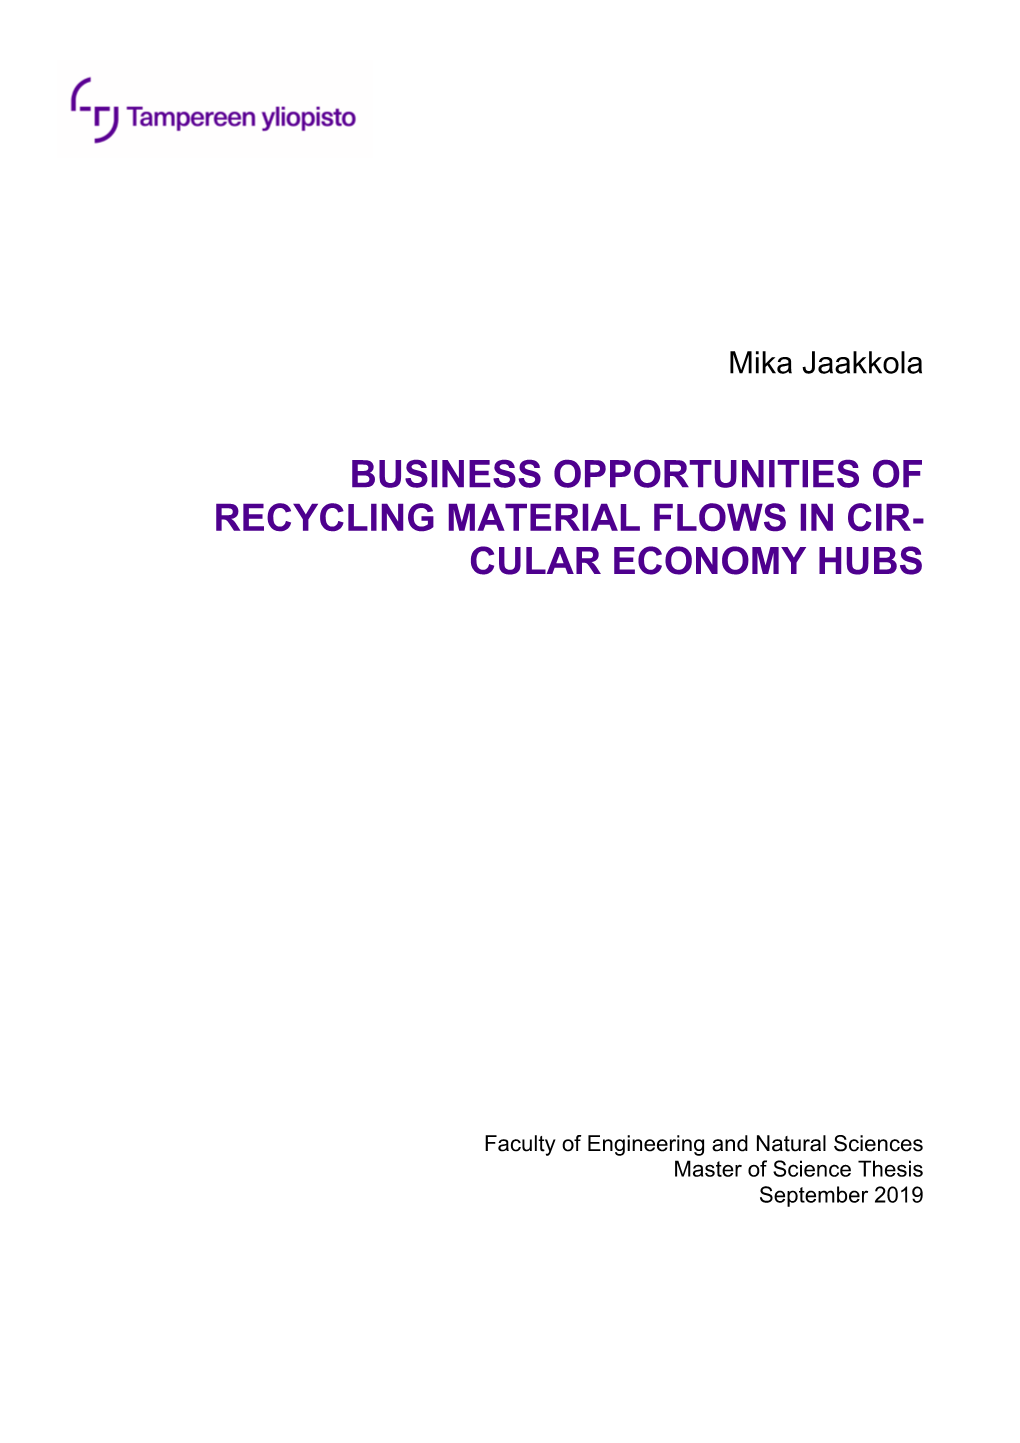 Business Opportunities of Recycling Material Flows in Cir- Cular Economy Hubs